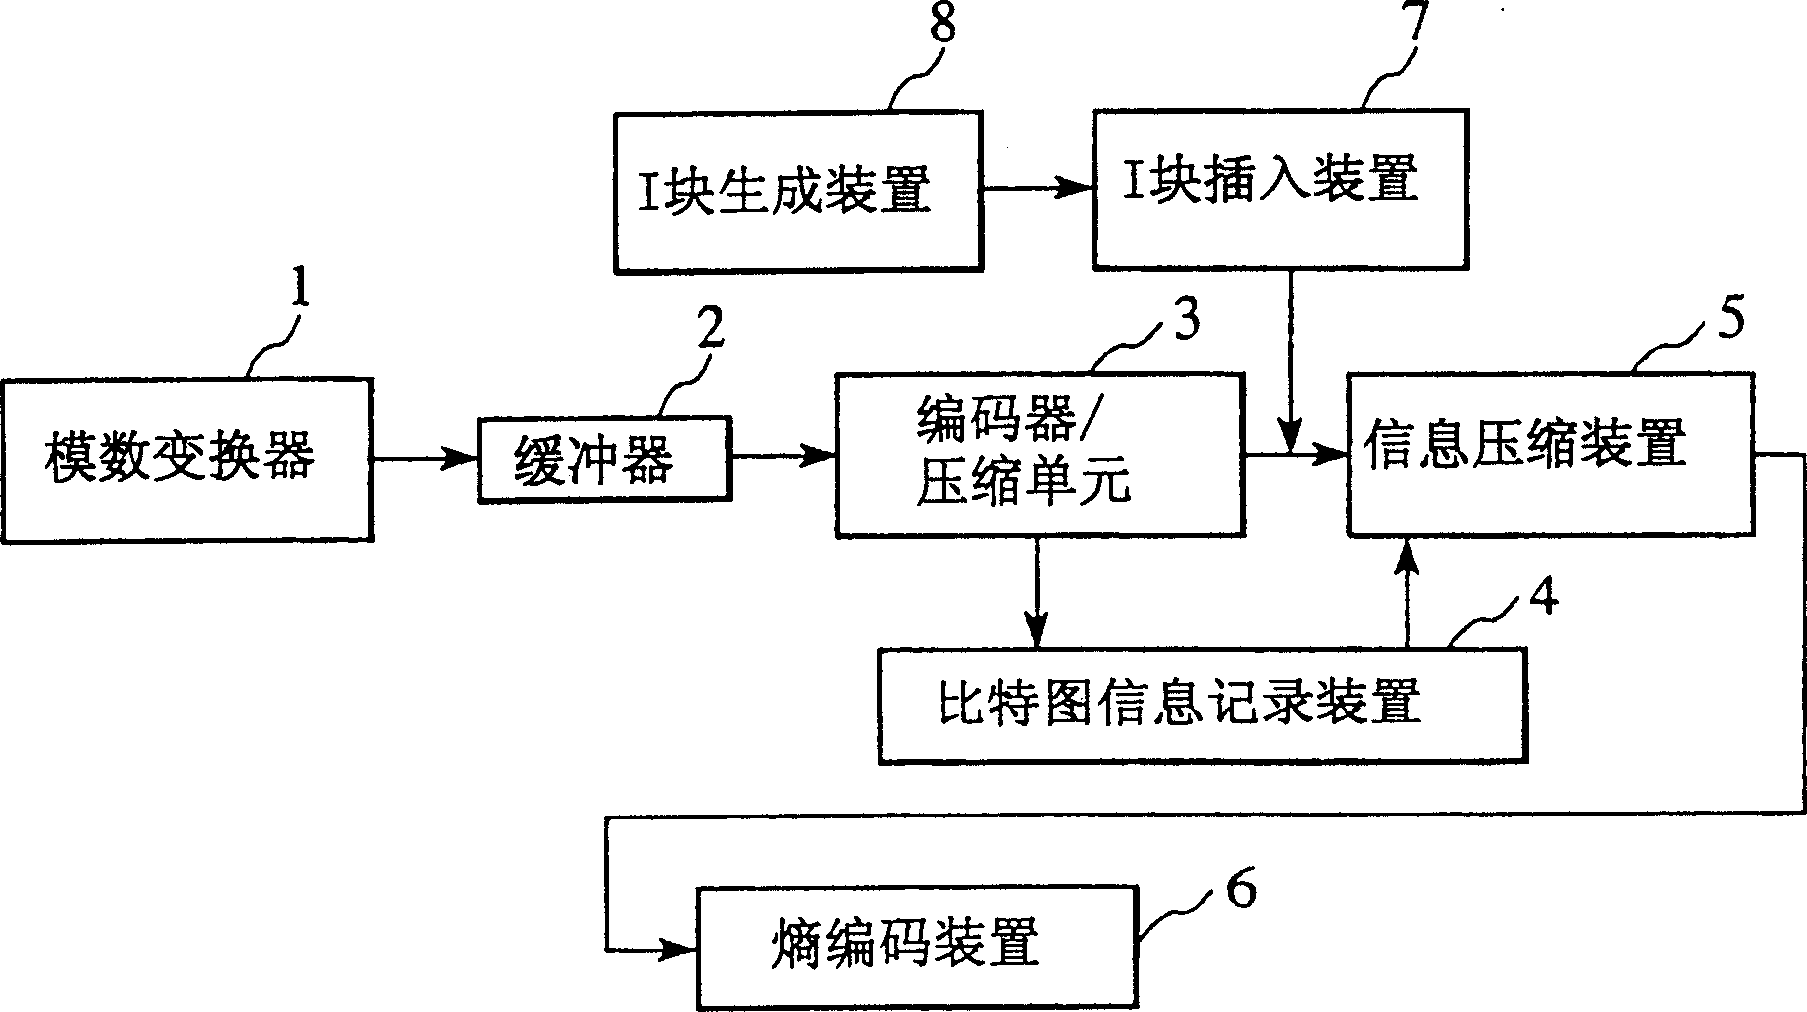 Moving-picture information compressing method and system